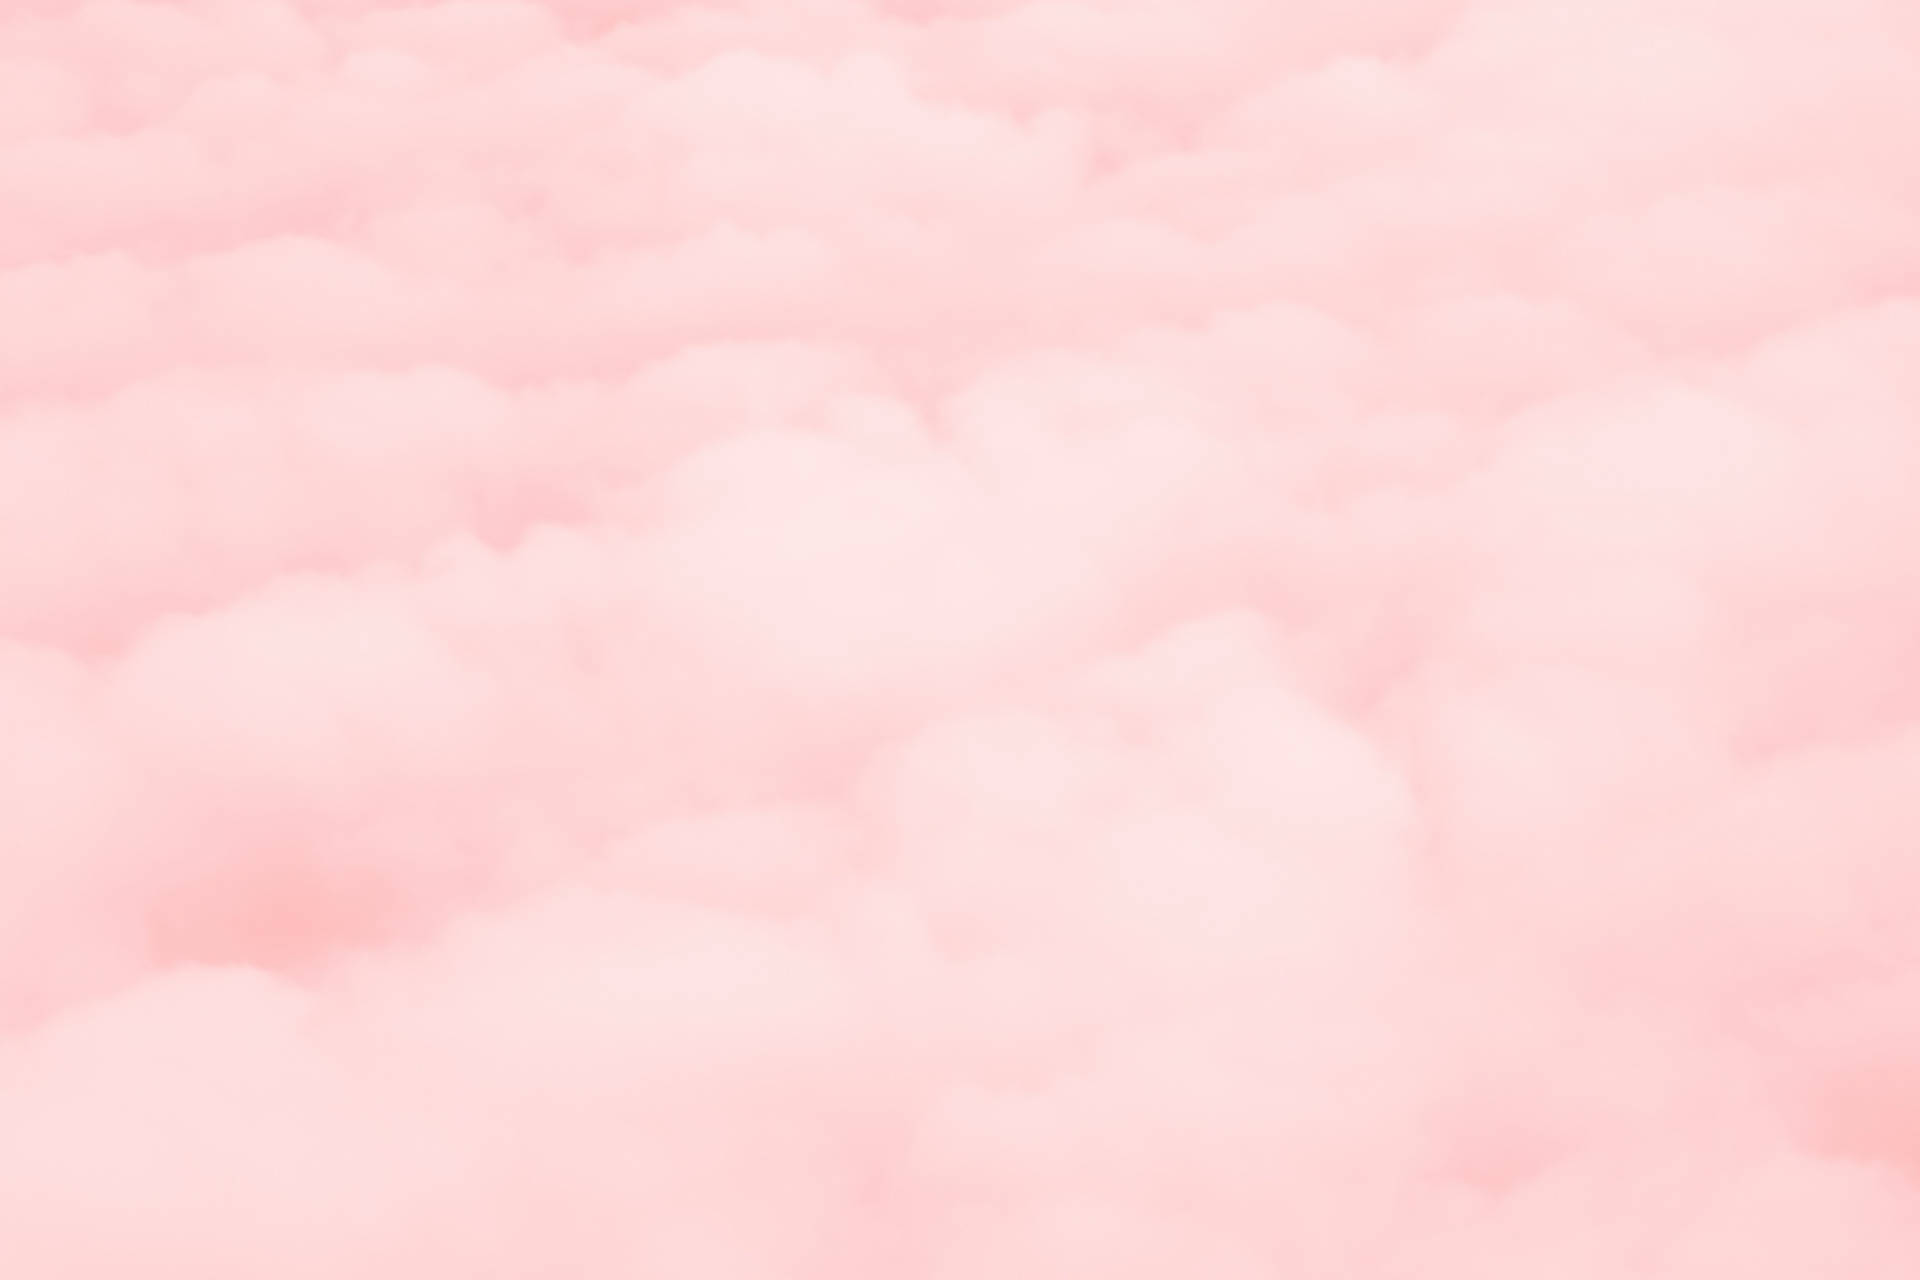 Cotton Candy Clouds Pretty Aesthetic Wallpaper